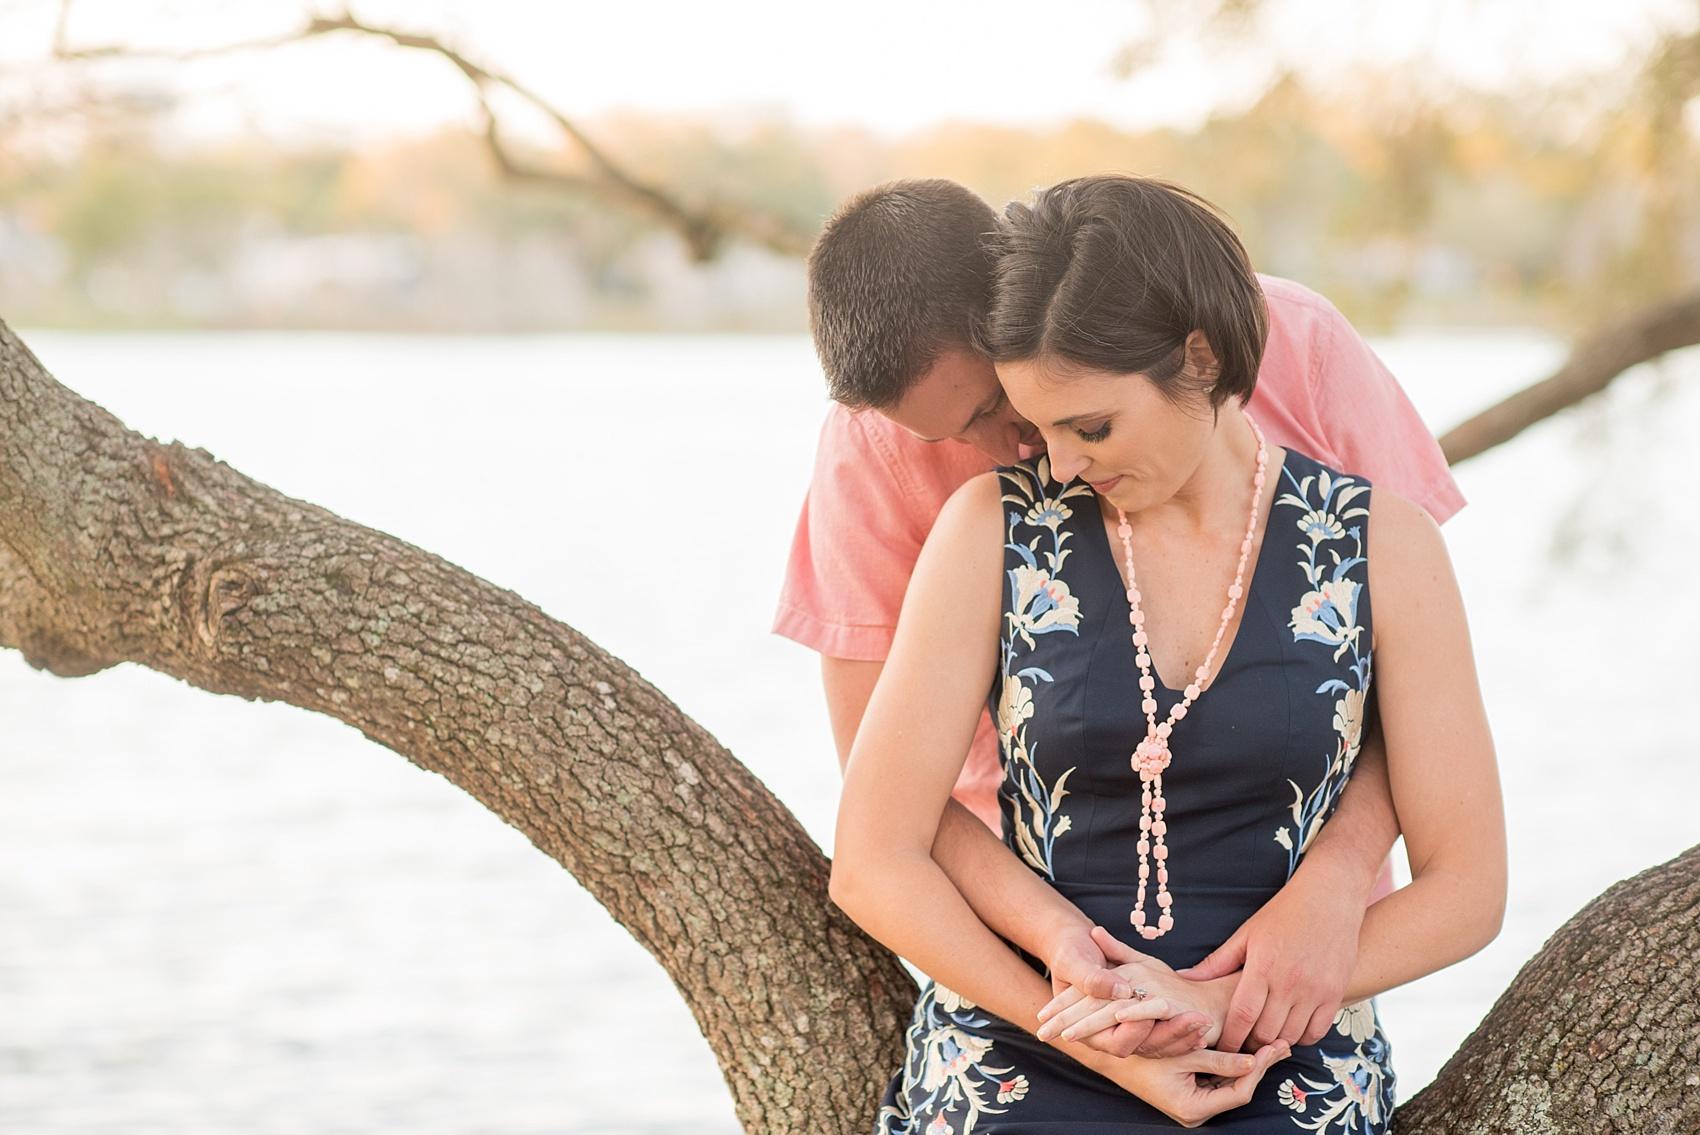 Downtown Orlando engagement session photos by Mikkel Paige Photography, FL wedding photographer.